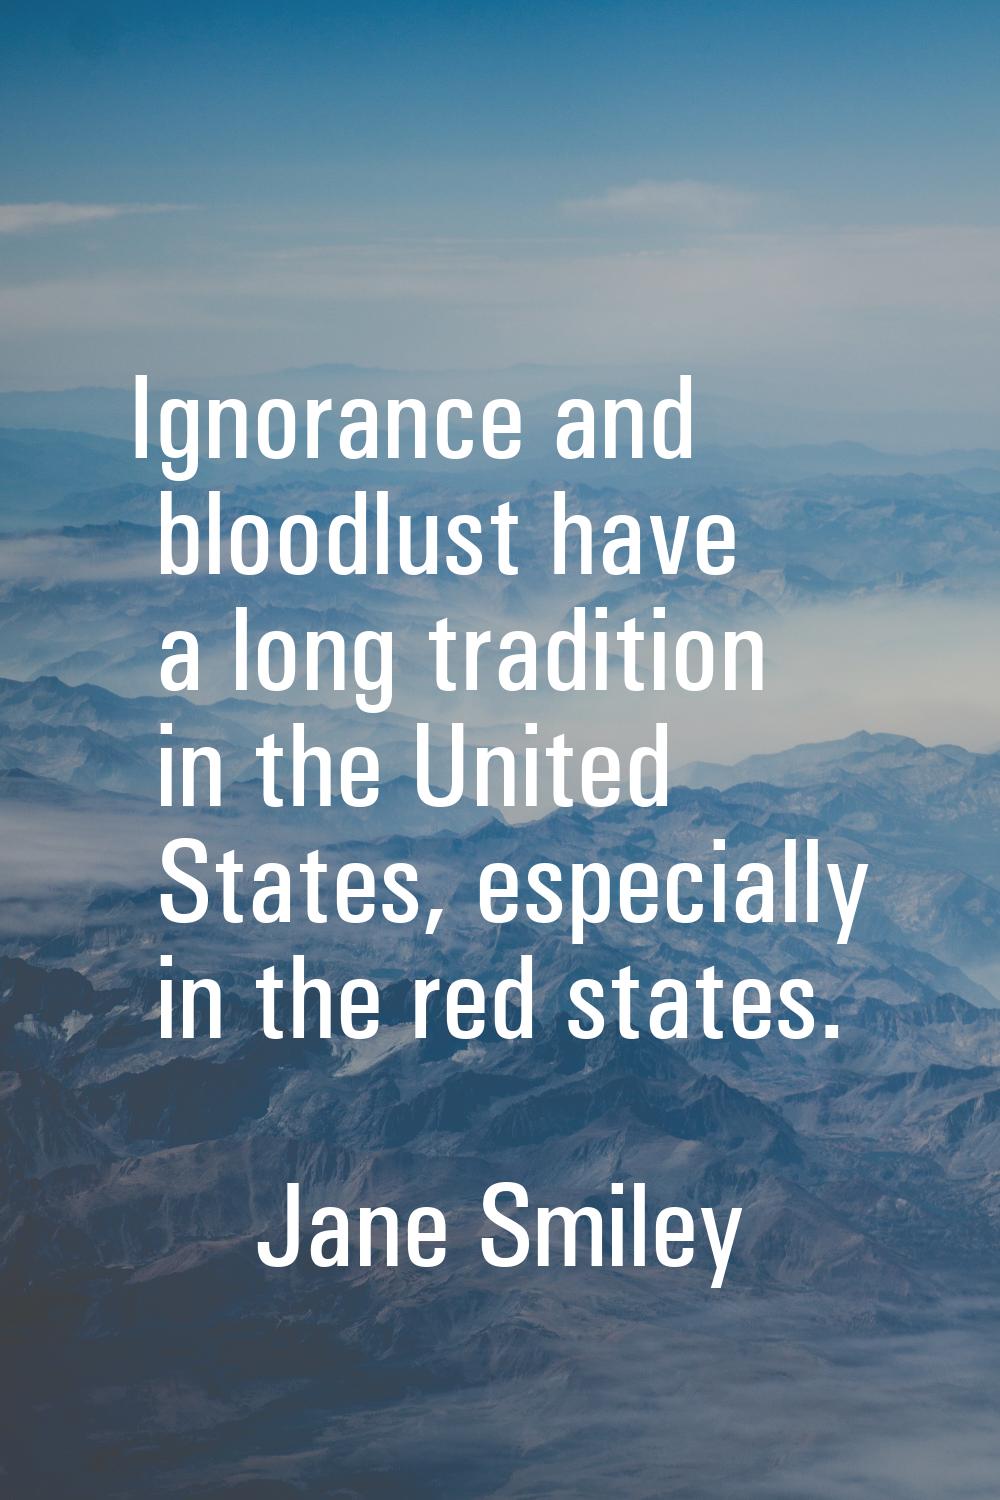 Ignorance and bloodlust have a long tradition in the United States, especially in the red states.